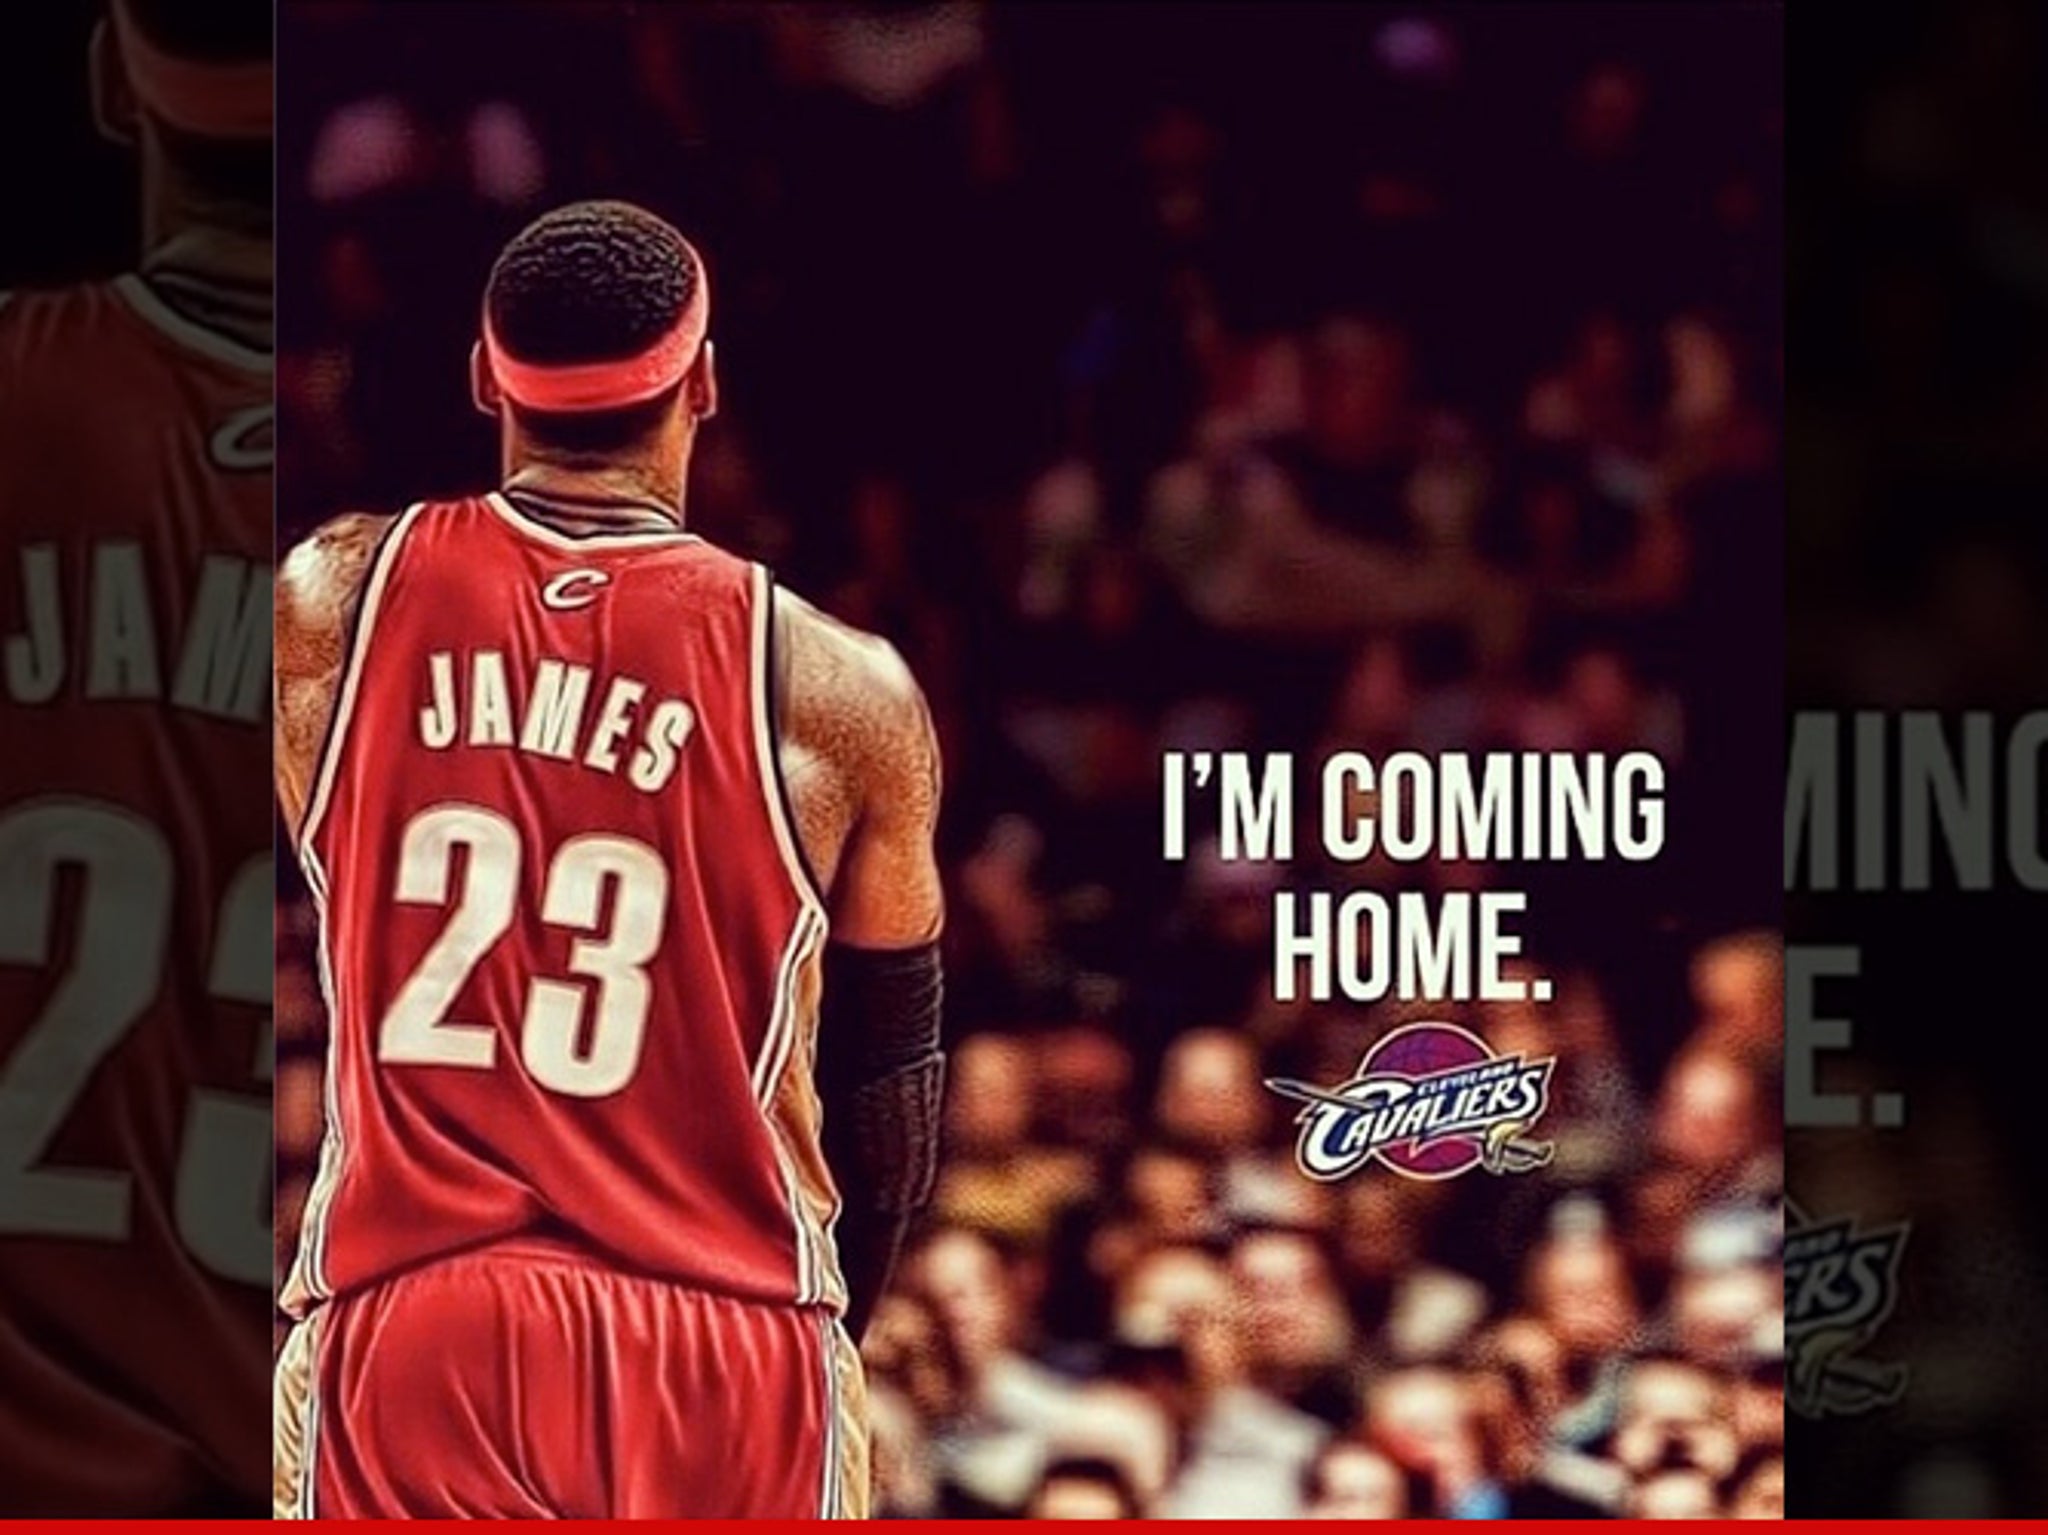 LeBron James says he's returning to Cavaliers, Sports